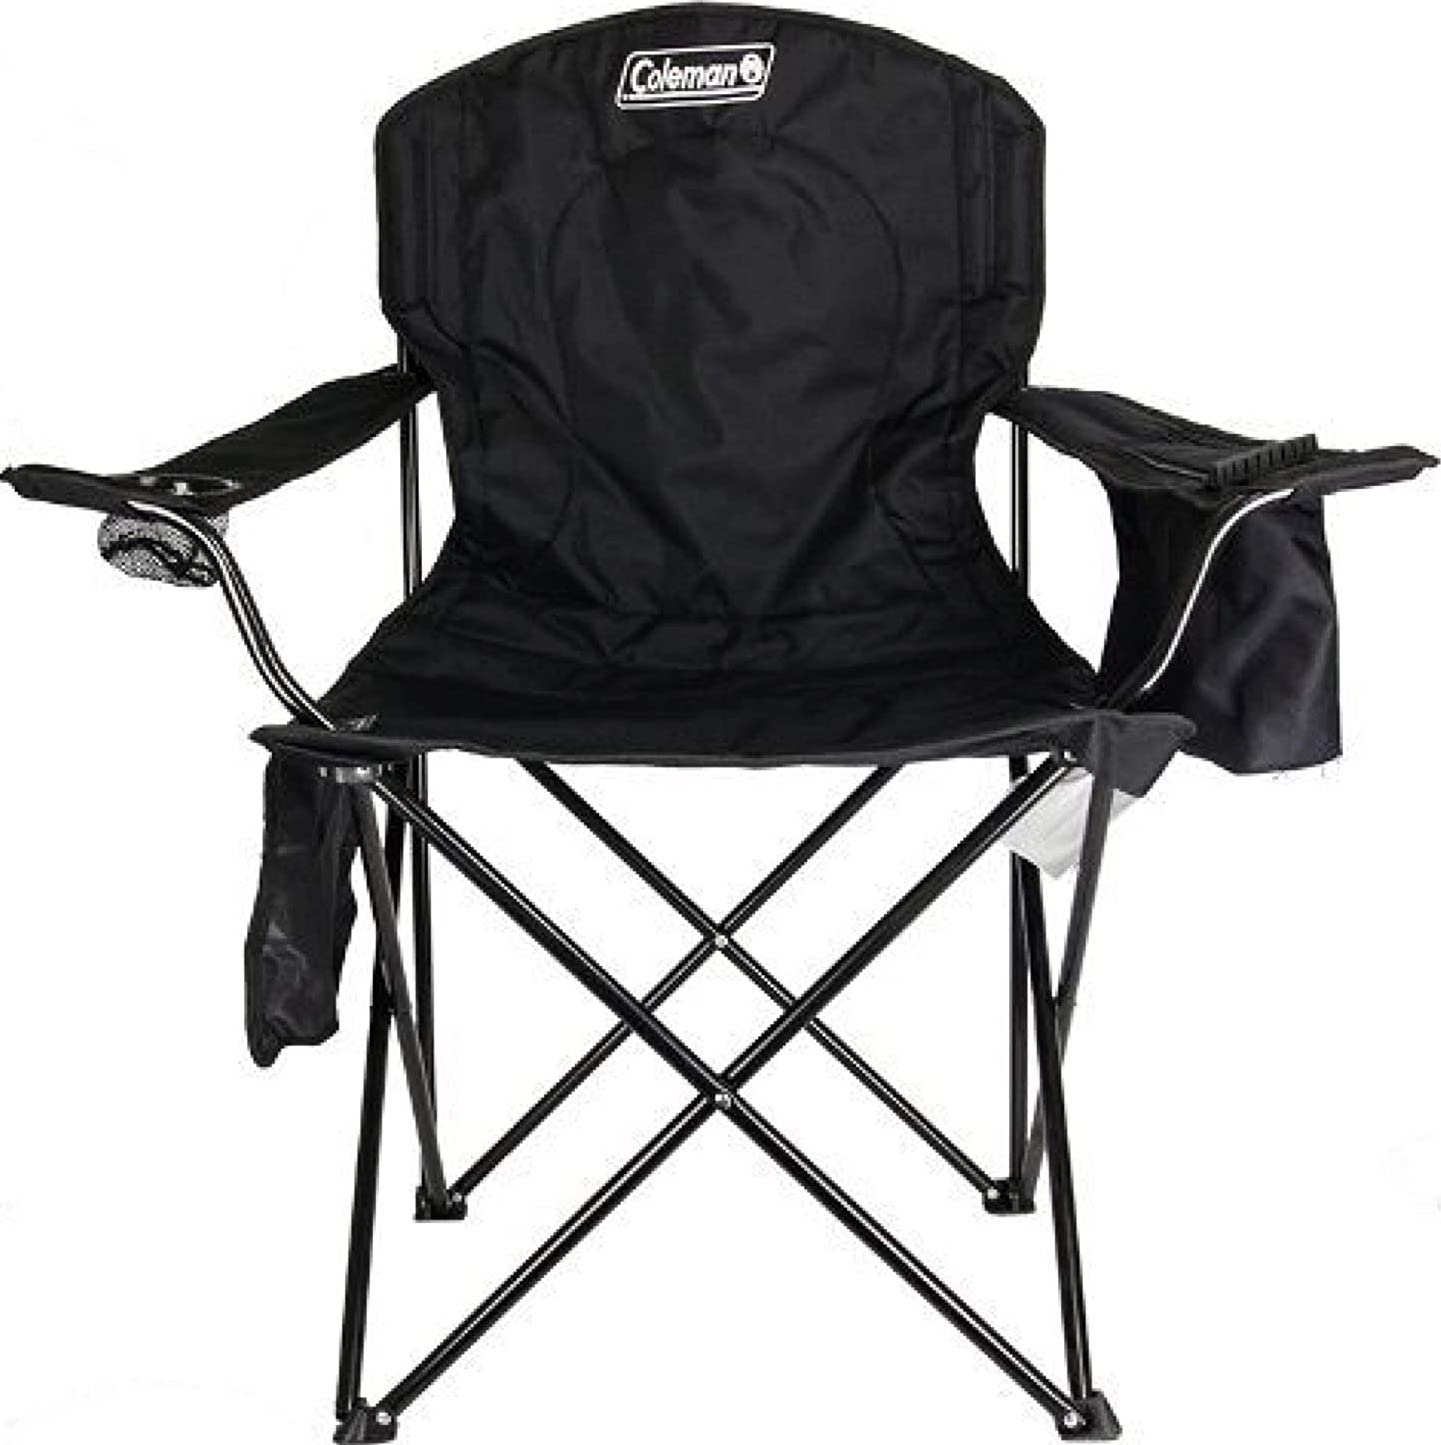 Coleman Quad Chair Render Cropped